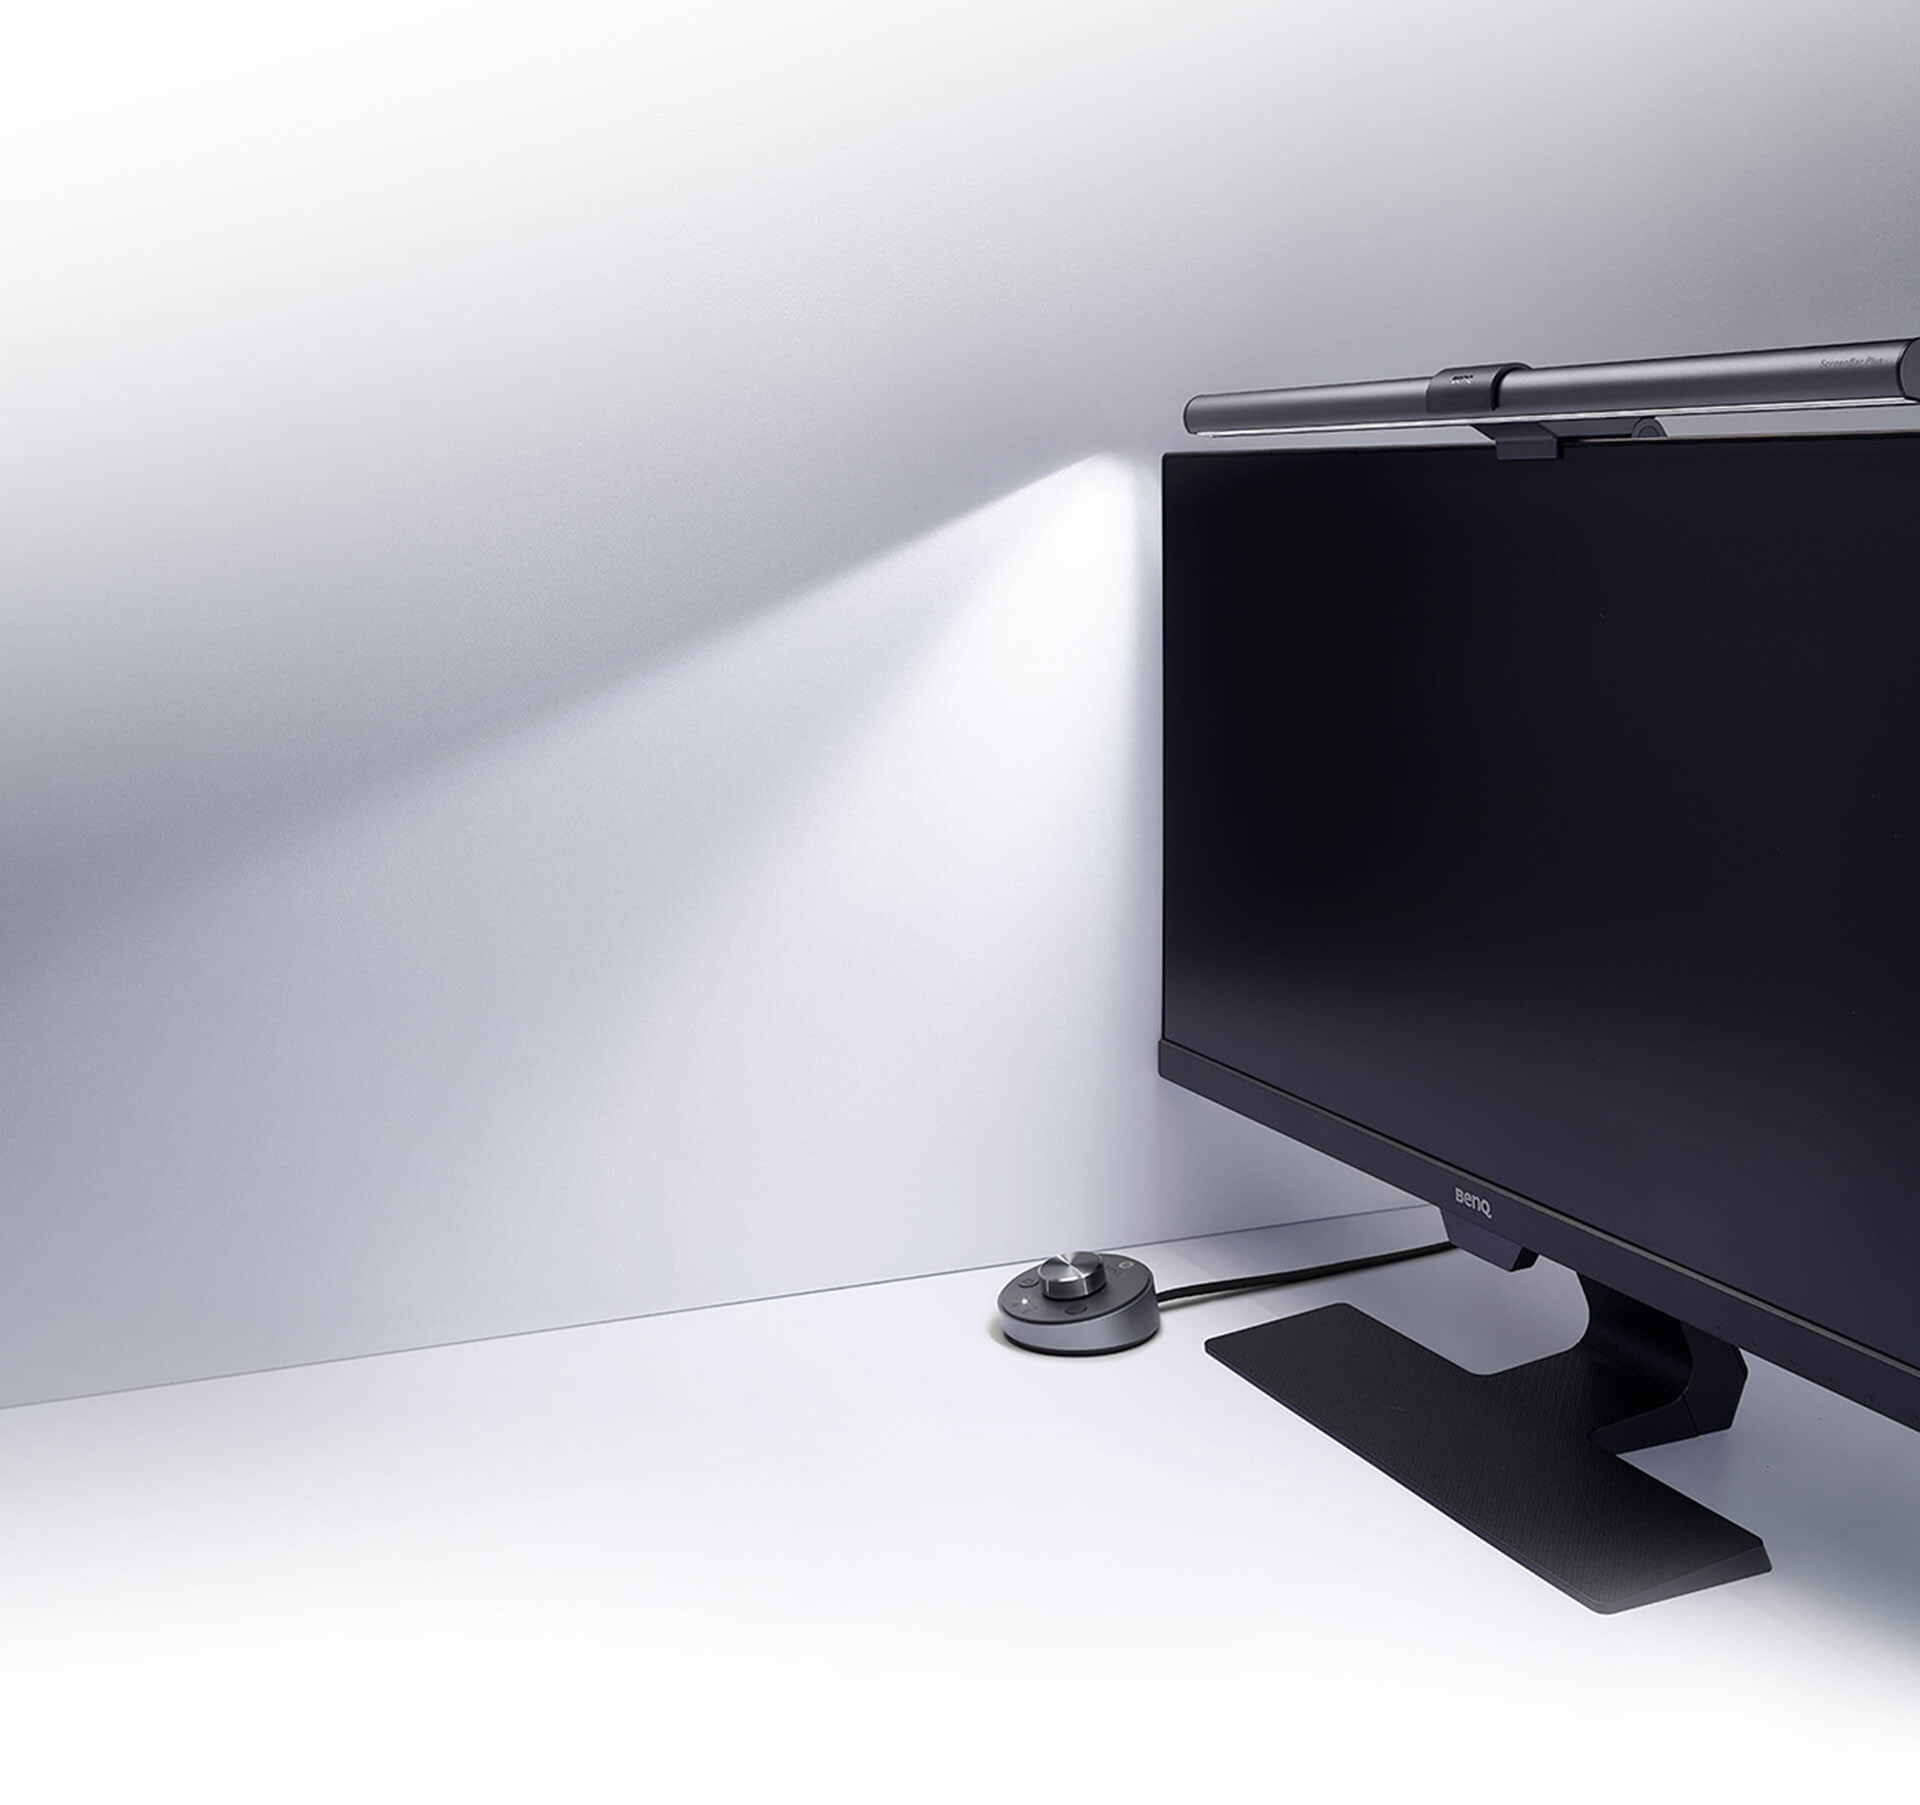 BenQ ScreenBar Plus monted on a monitor that's angled to the left